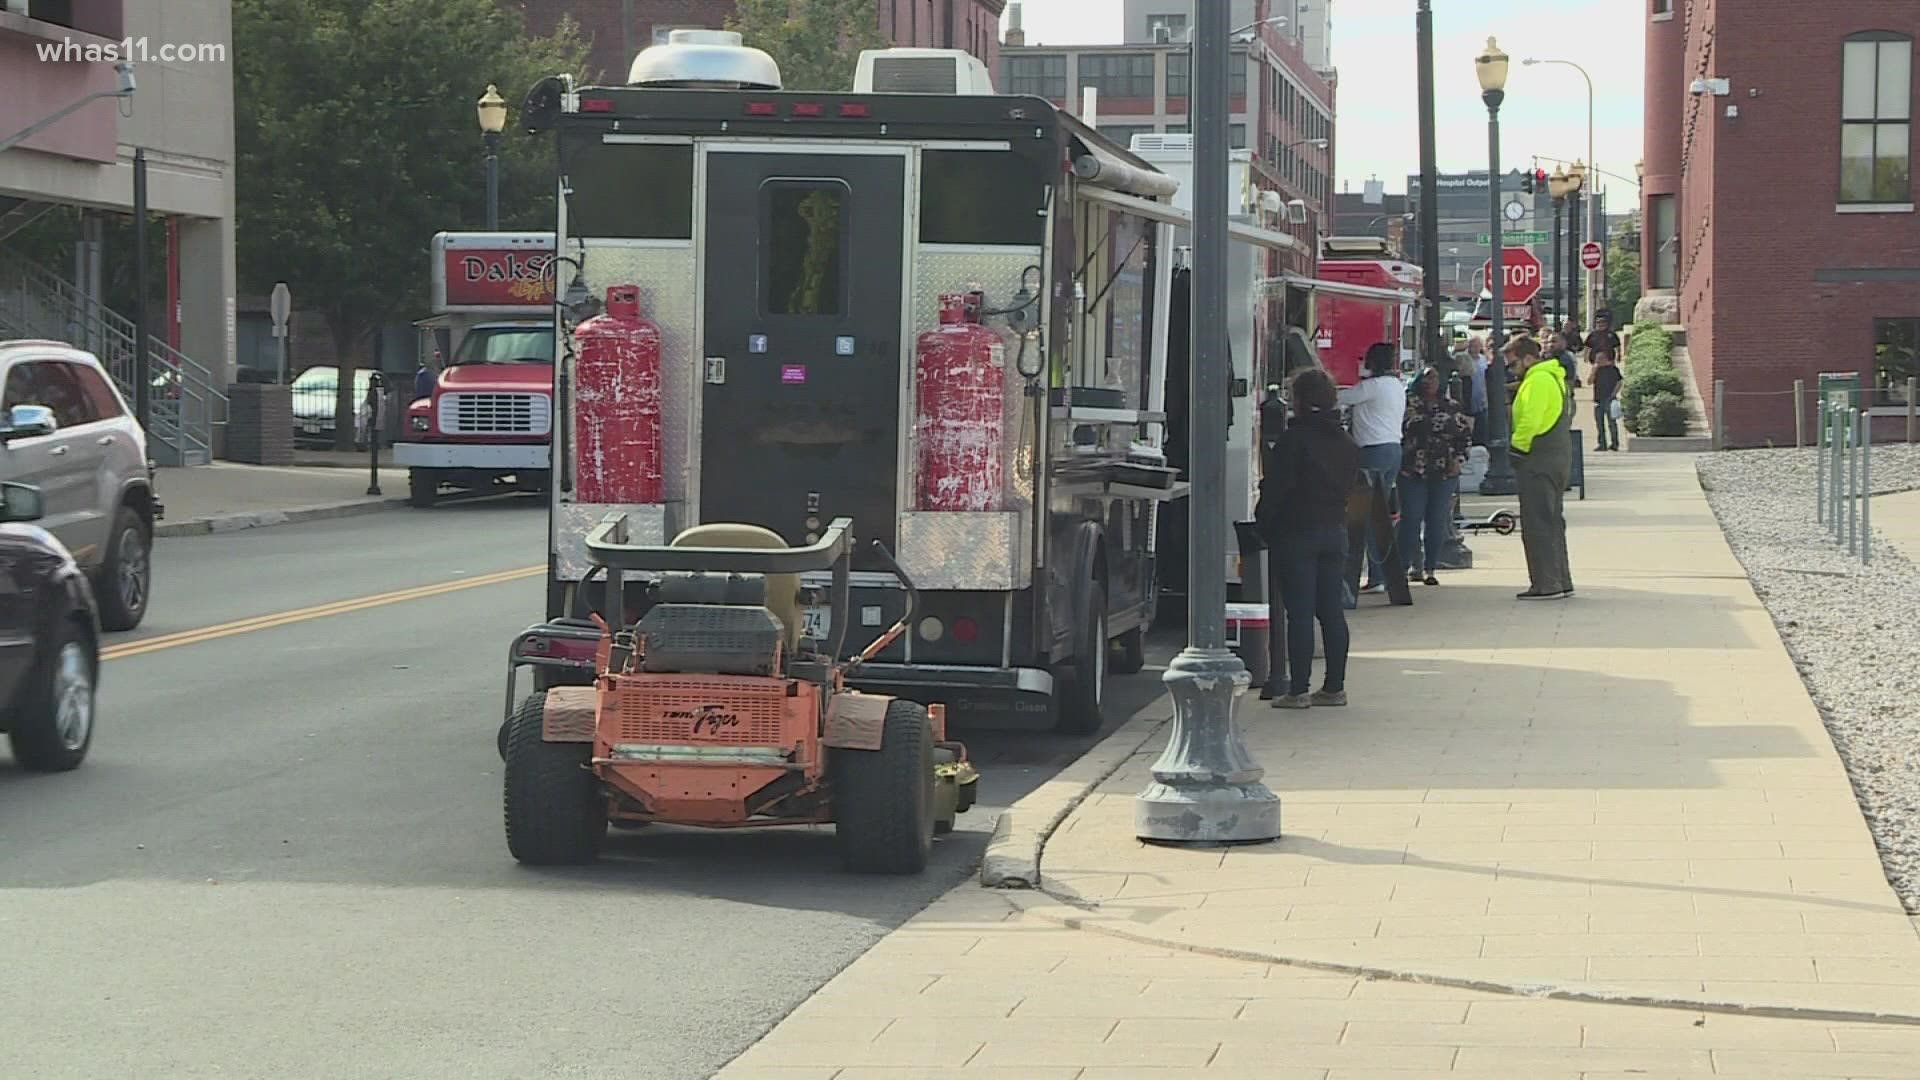 A Kentucky judge issued the ruling after a lawsuit by the Institute for Justice. The ordinance sought to keep food trucks in Louisville 150 feet from restaurants.